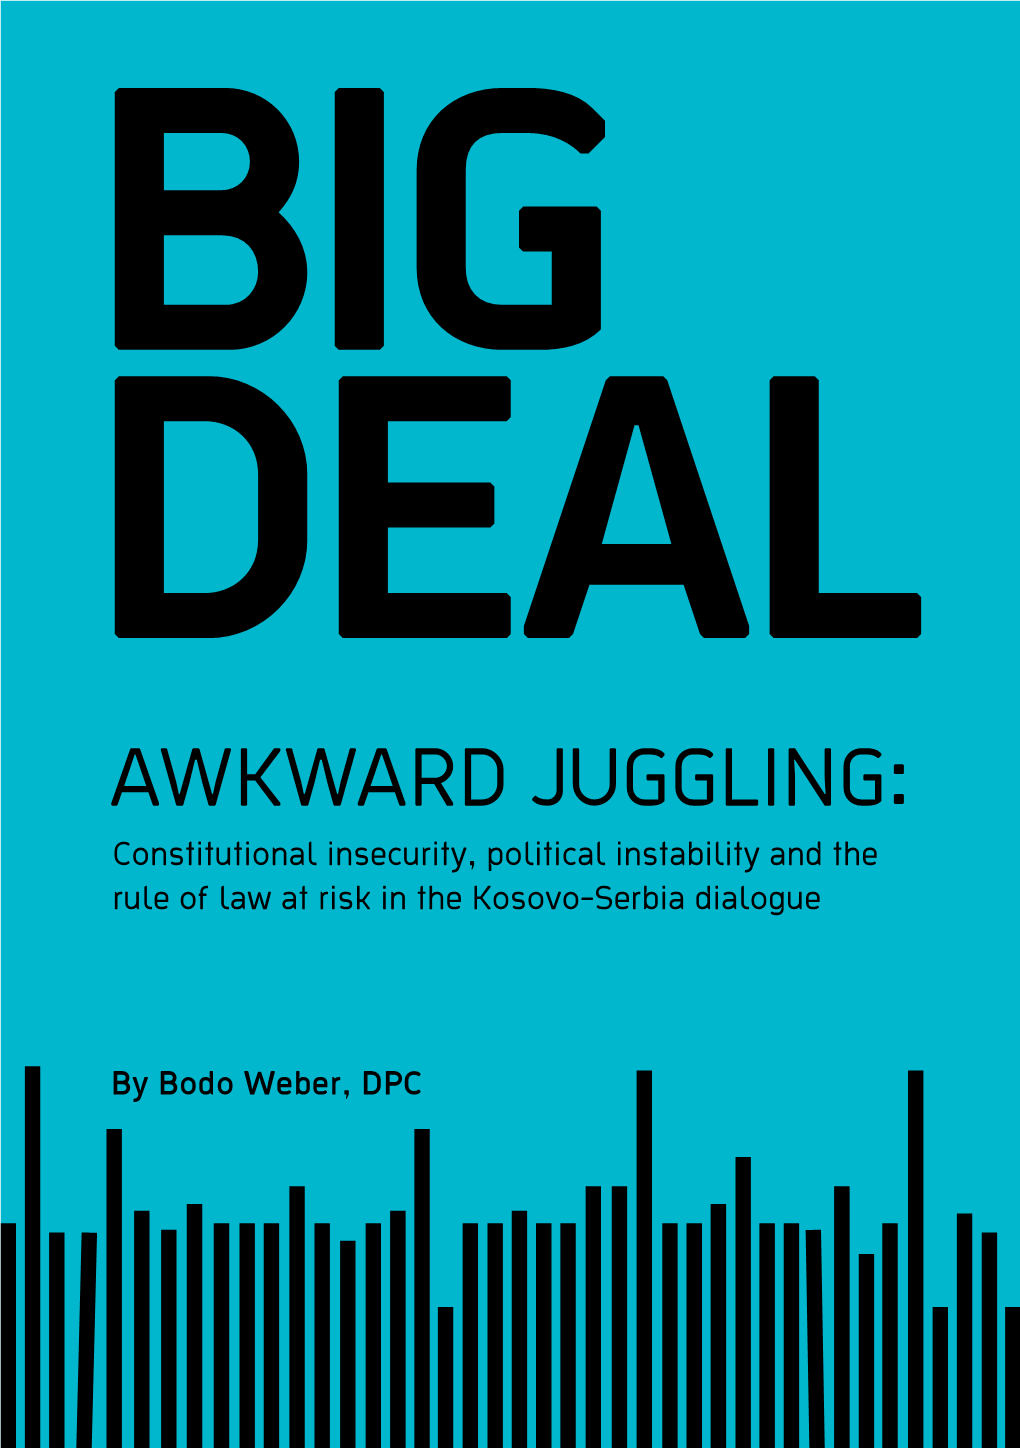 AWKWARD JUGGLING: Constitutional Insecurity, Political Instability and the Rule of Law at Risk in the Kosovo-Serbia Dialogue